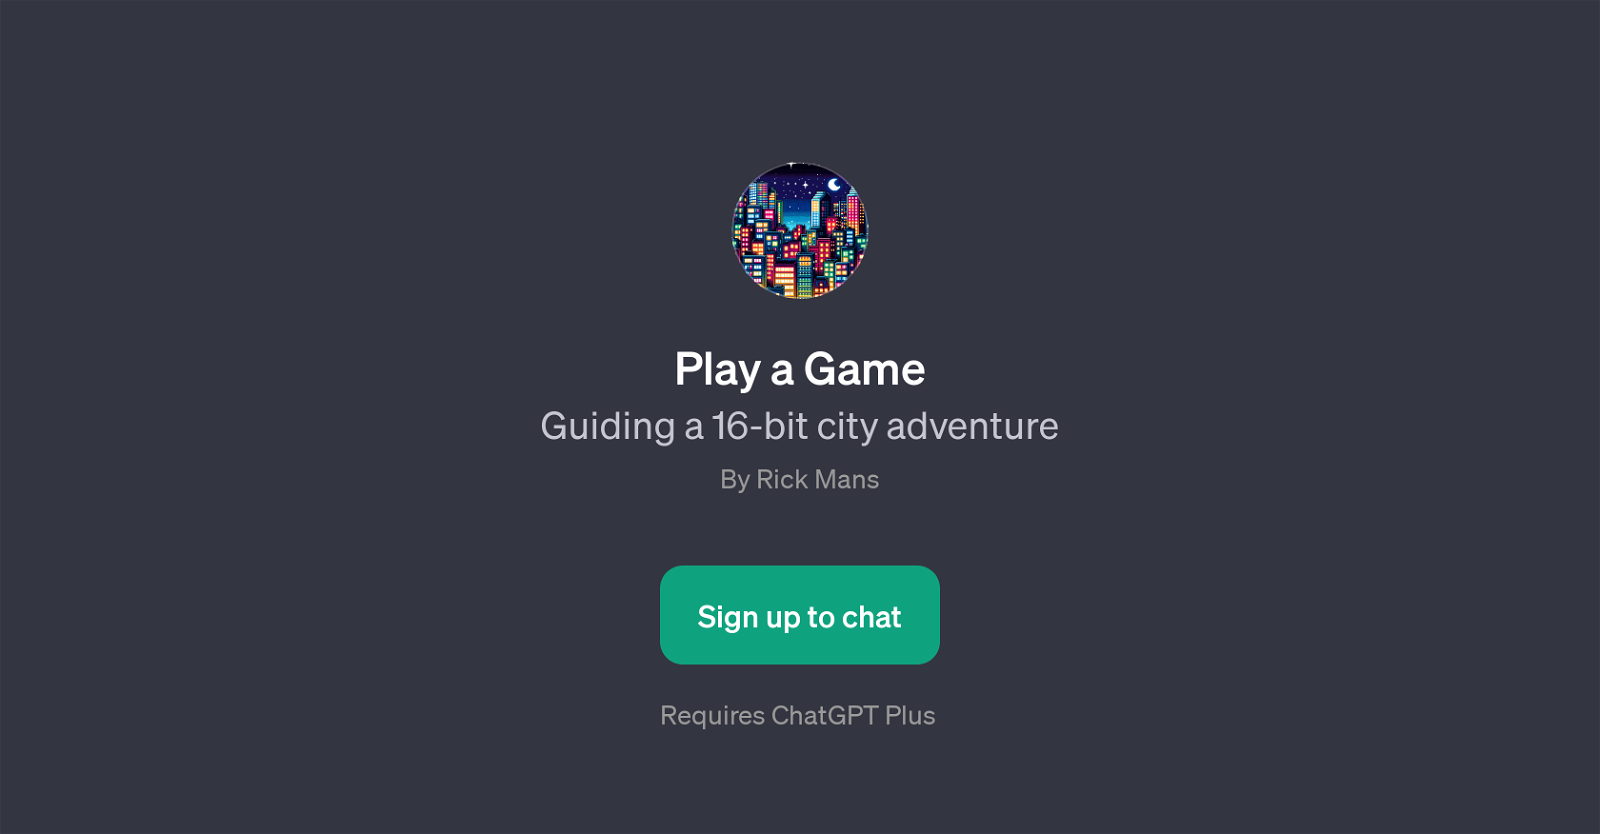 Play a Game website